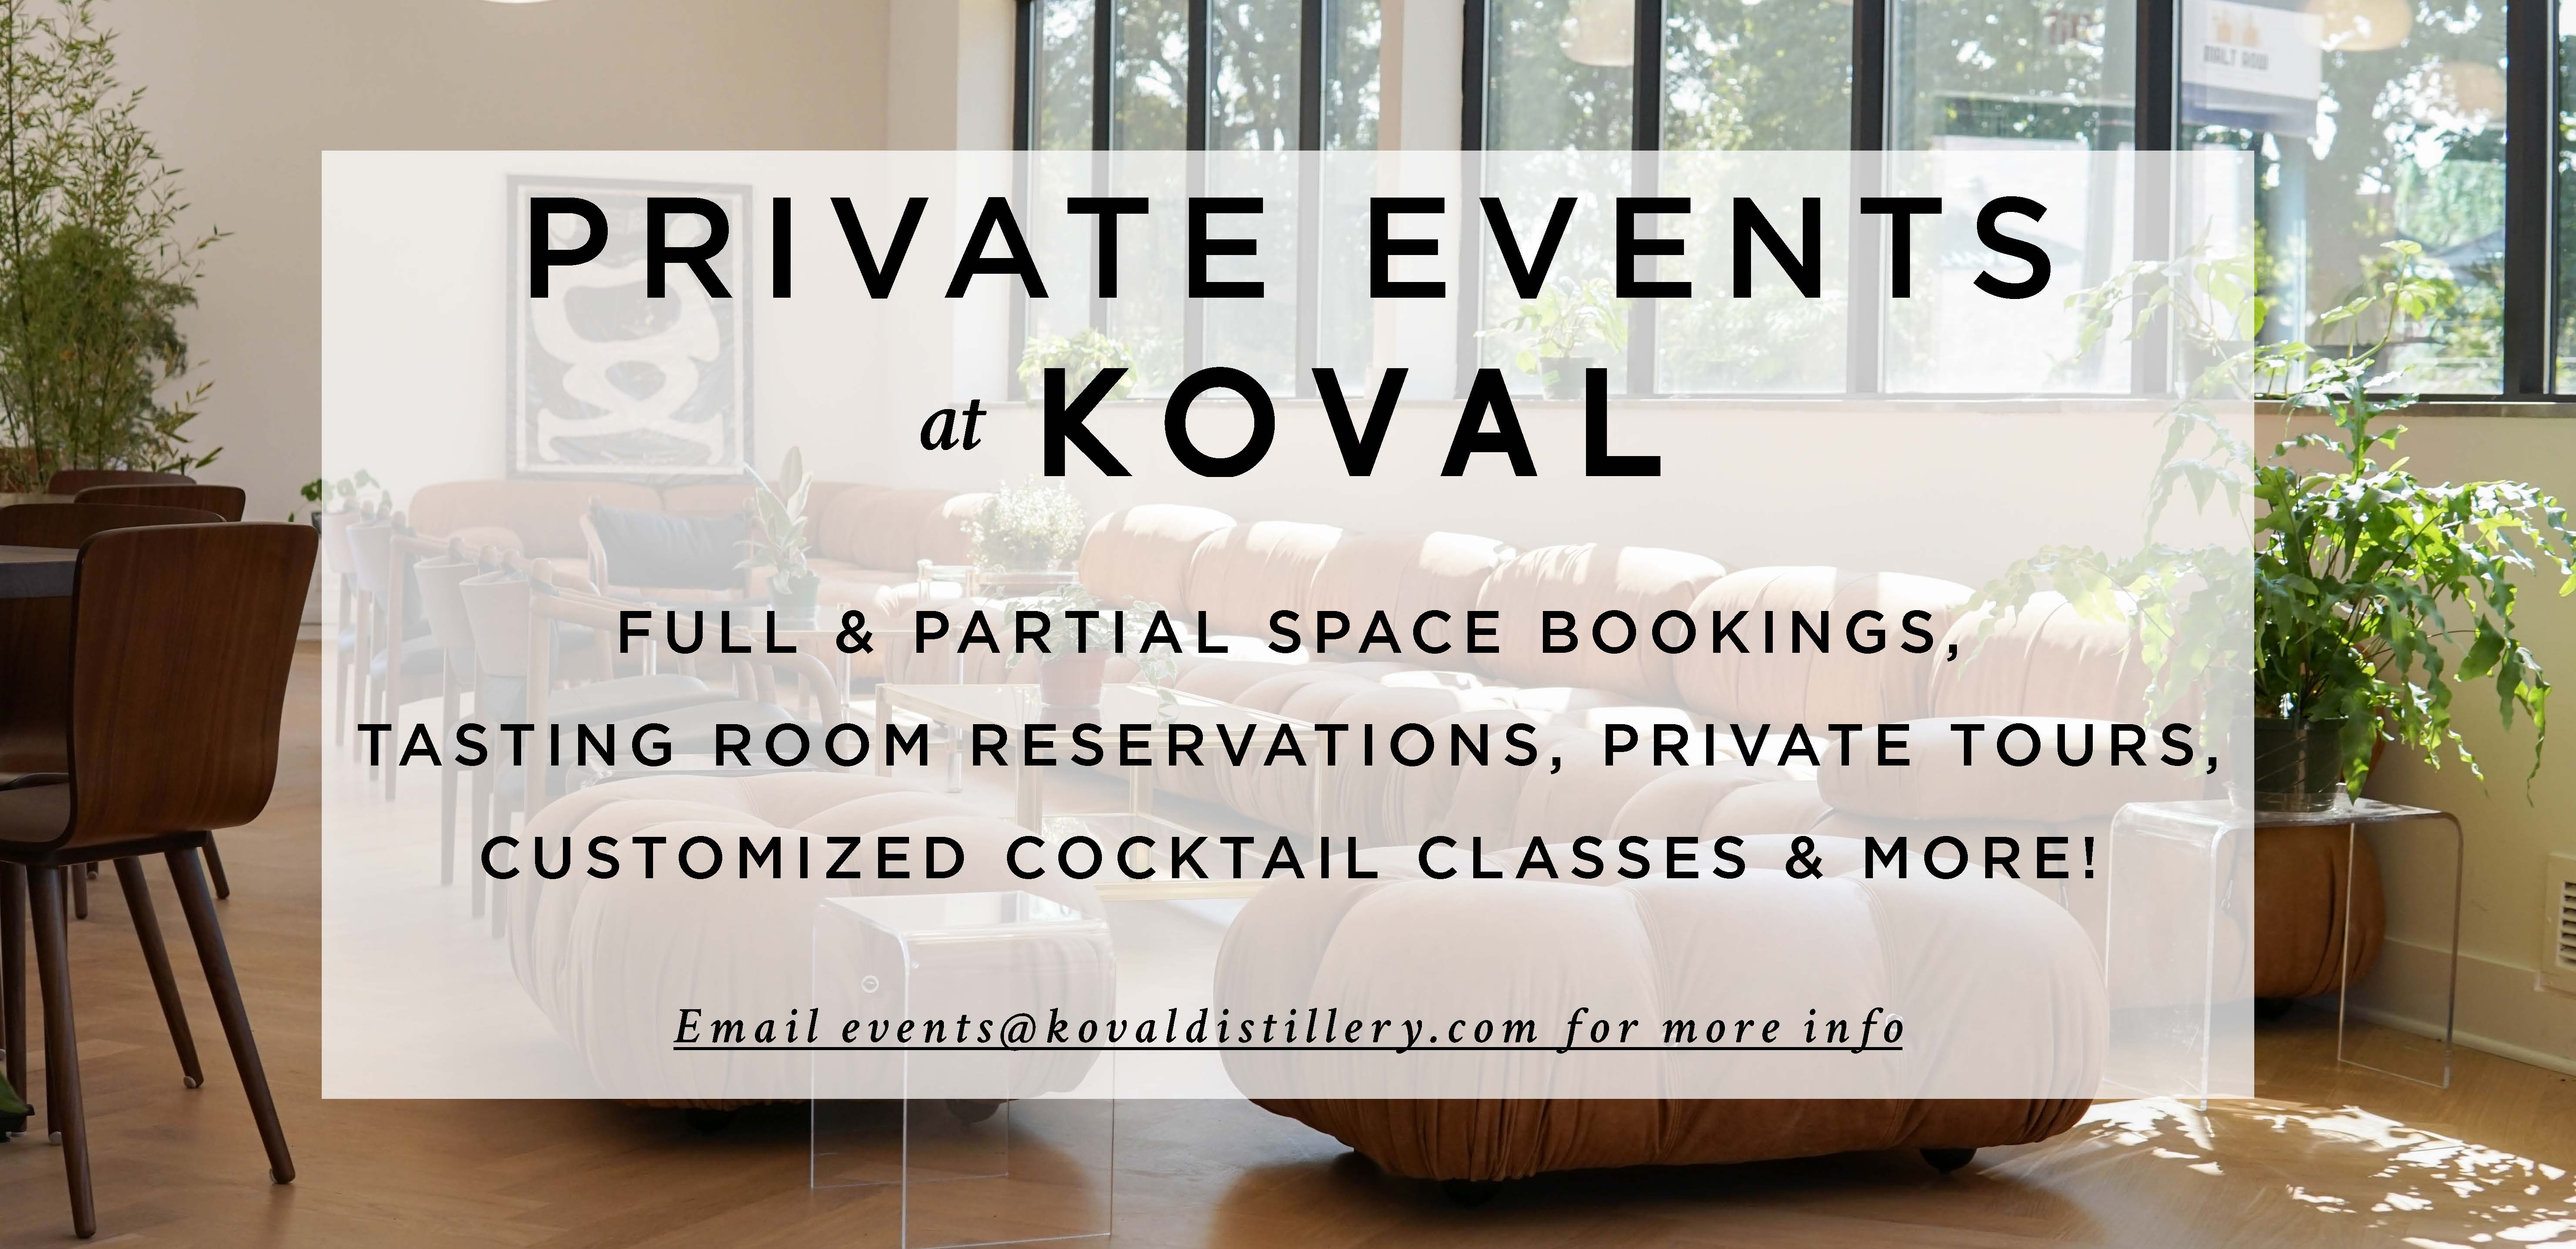 Private events website banner